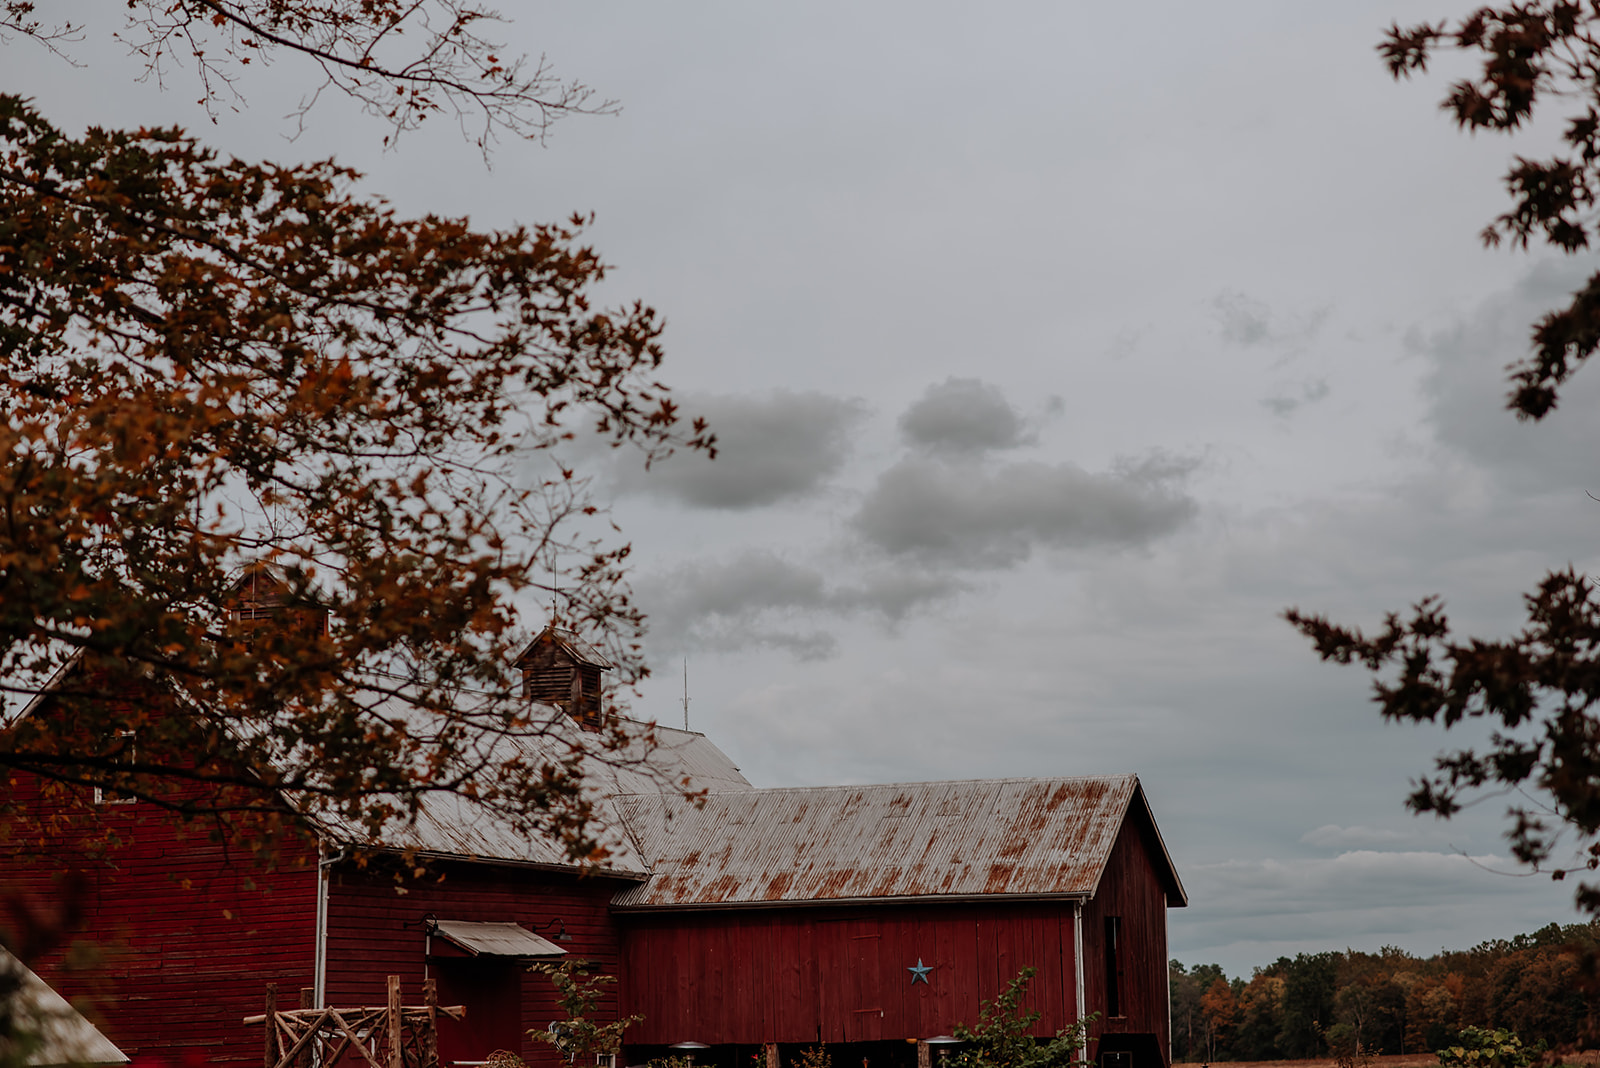 Big red barn framed with orange autumn leaves on a cloudy day.